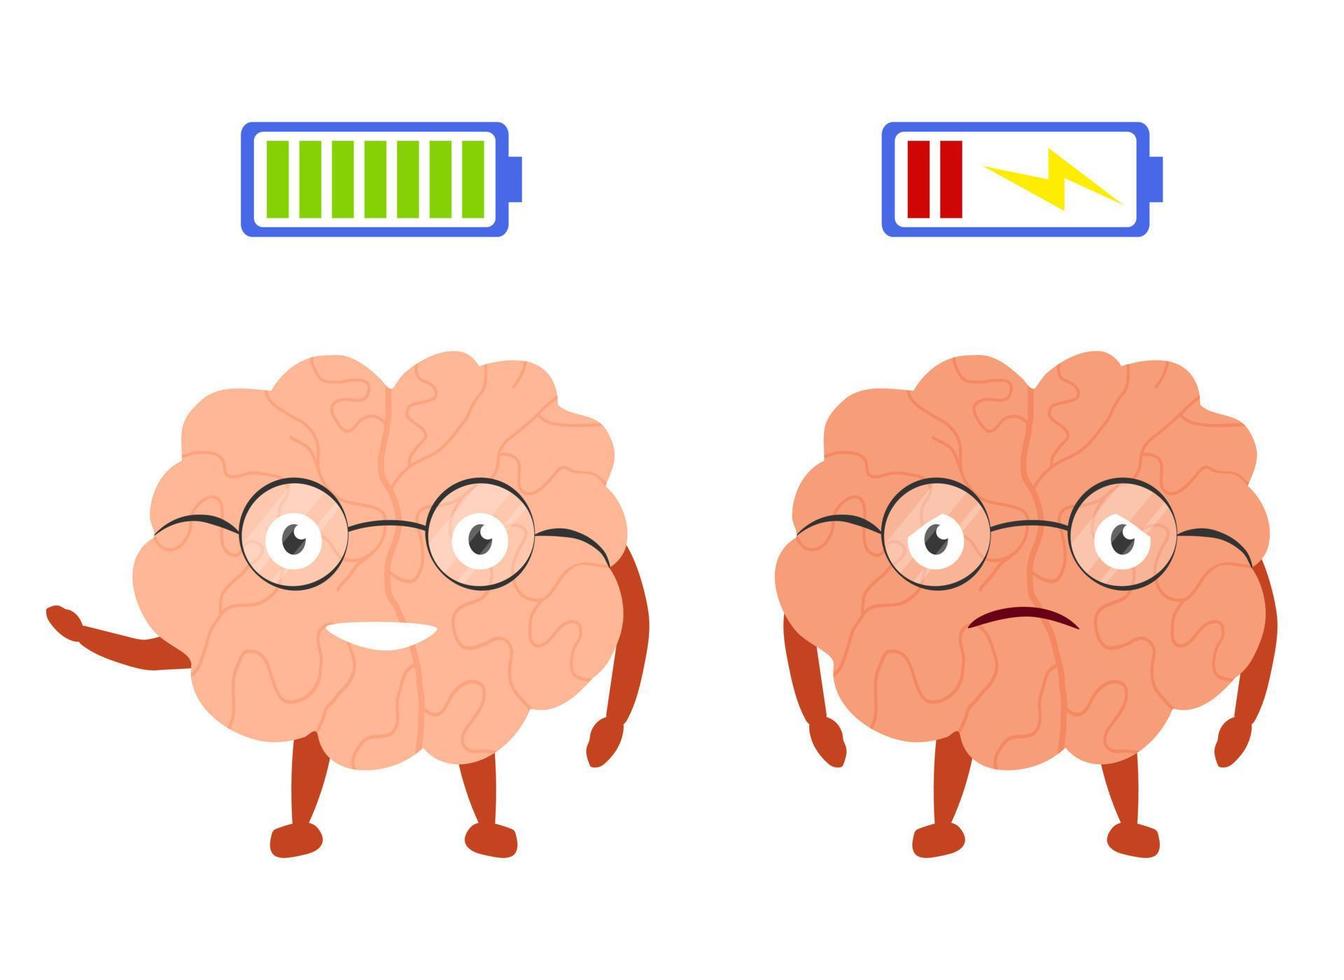 Cute brain character with low and full life battery. Tiredness and happiness concept. Cartoon vector illustration isolated on white background. Sad unhappy fatigue and cheerful smiling face.